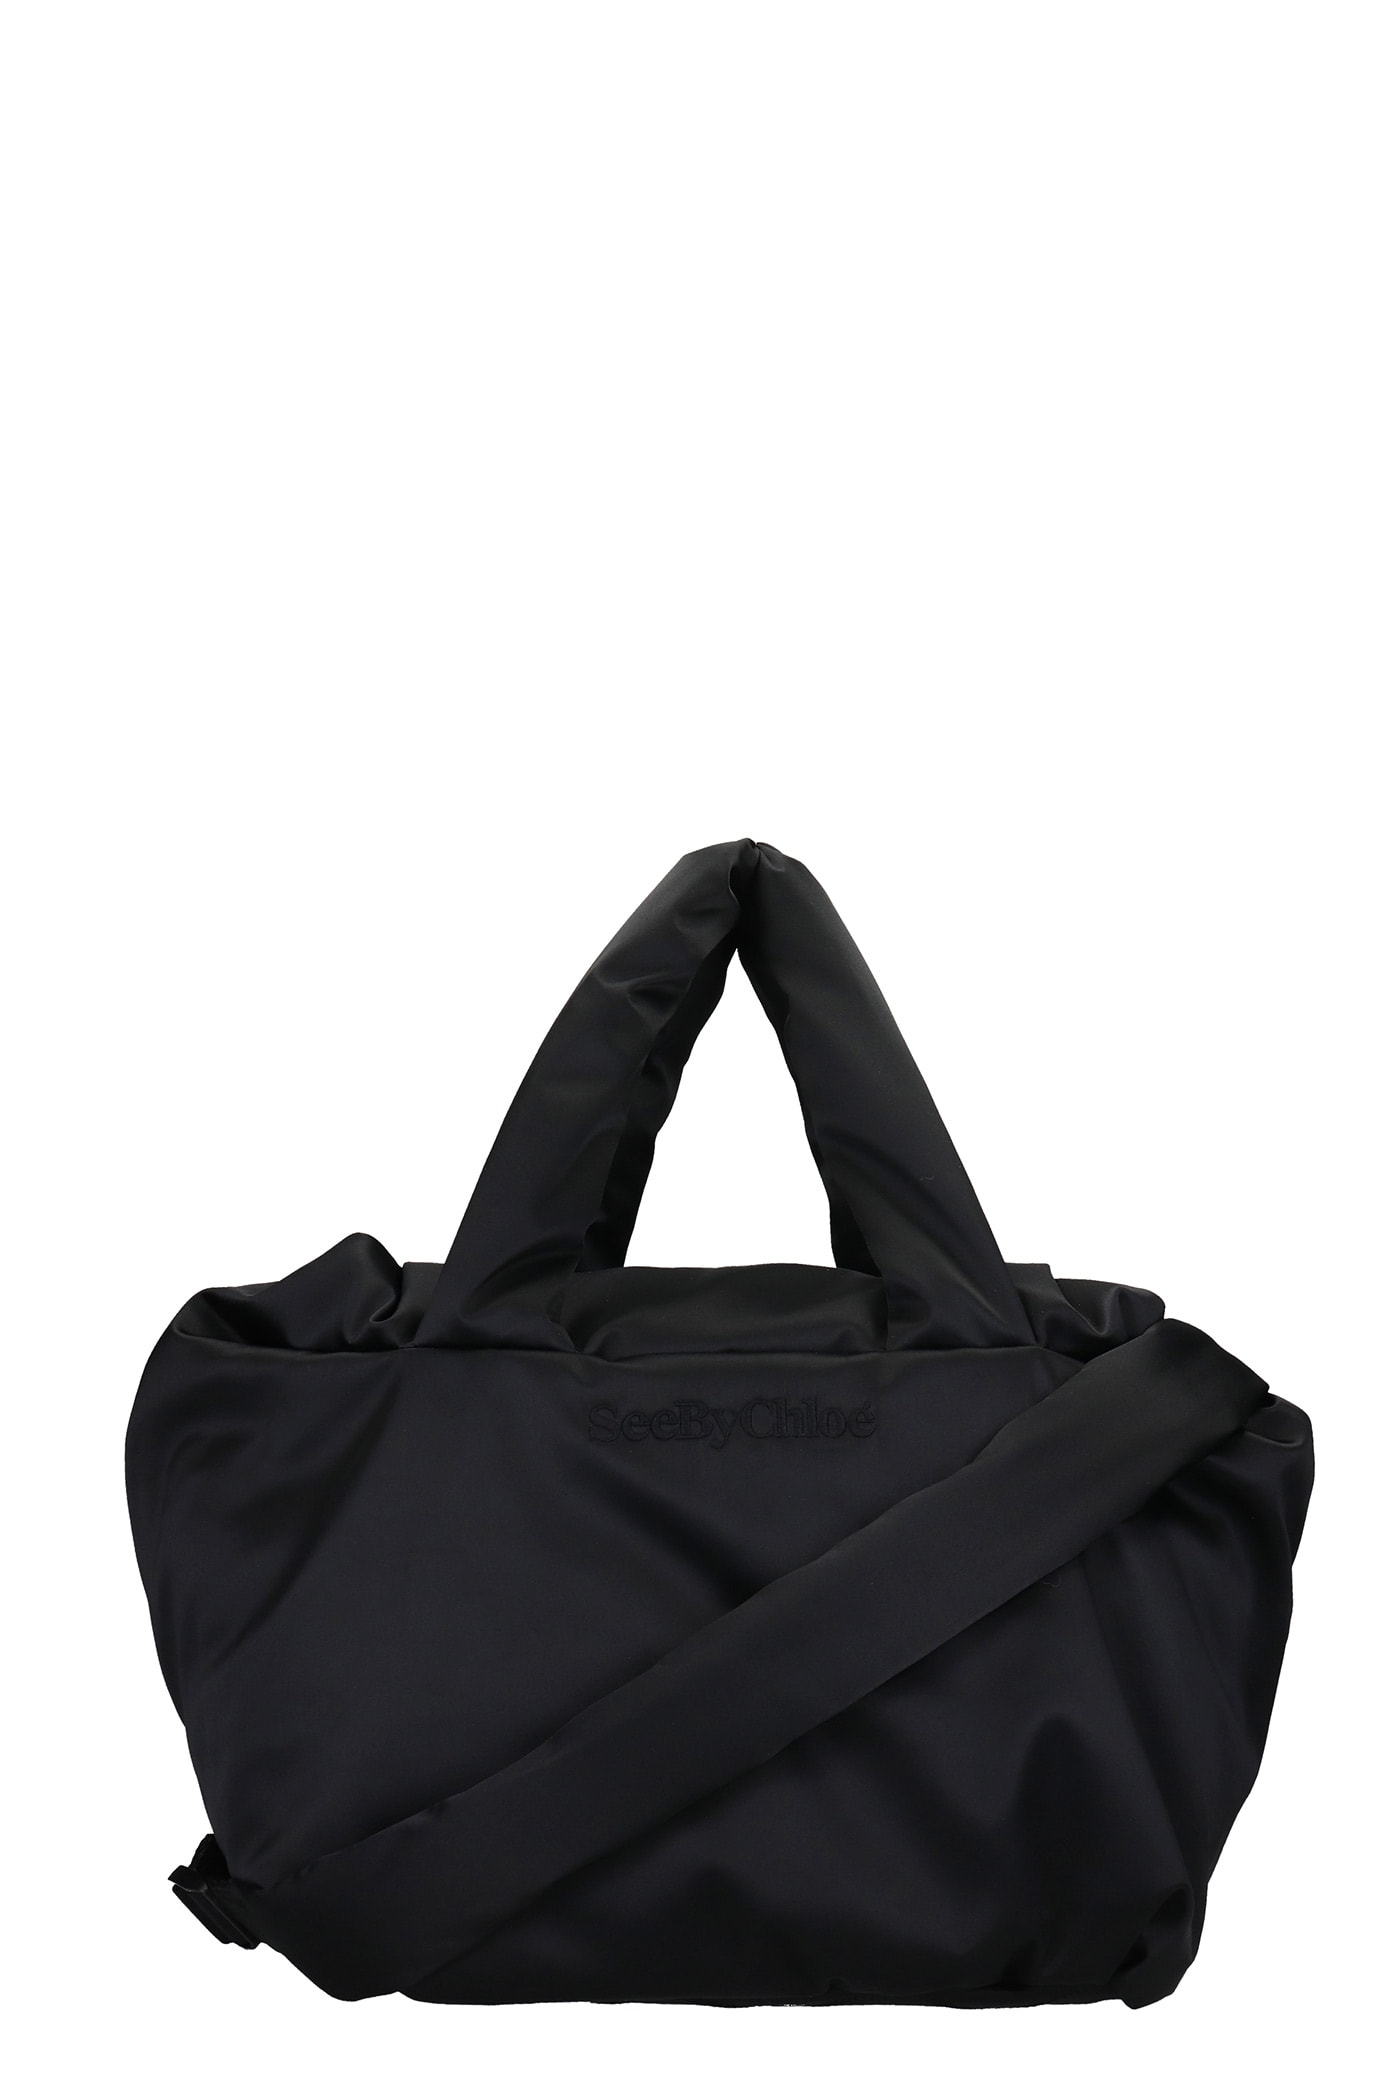 See by Chloé Tilly Tote In Black Nylon